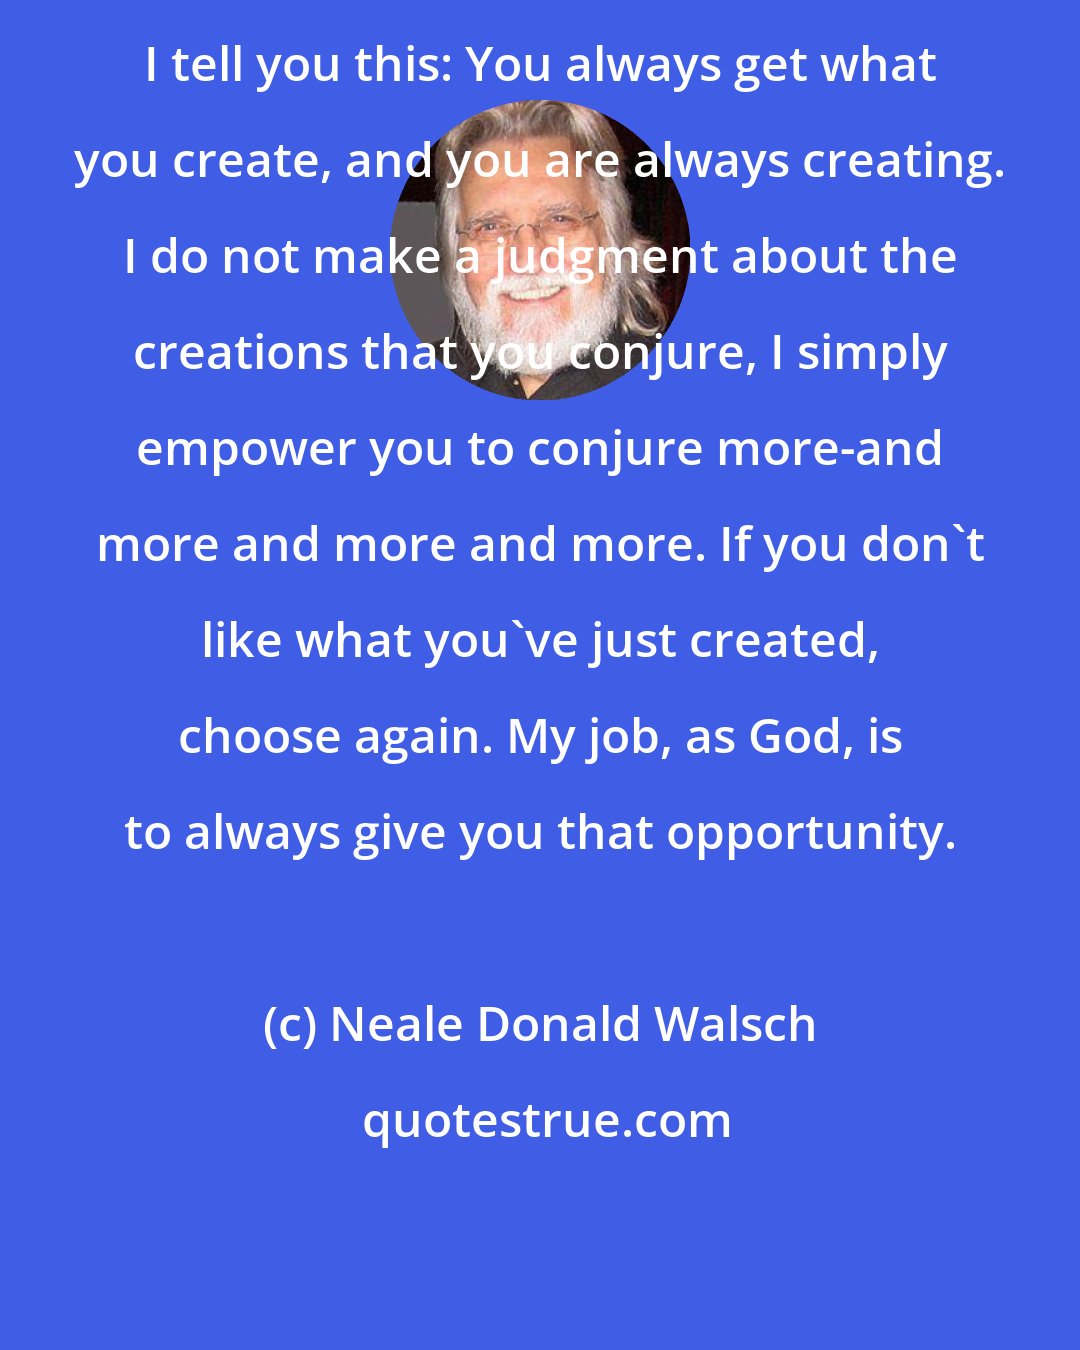 Neale Donald Walsch: I tell you this: You always get what you create, and you are always creating. I do not make a judgment about the creations that you conjure, I simply empower you to conjure more-and more and more and more. If you don't like what you've just created, choose again. My job, as God, is to always give you that opportunity.